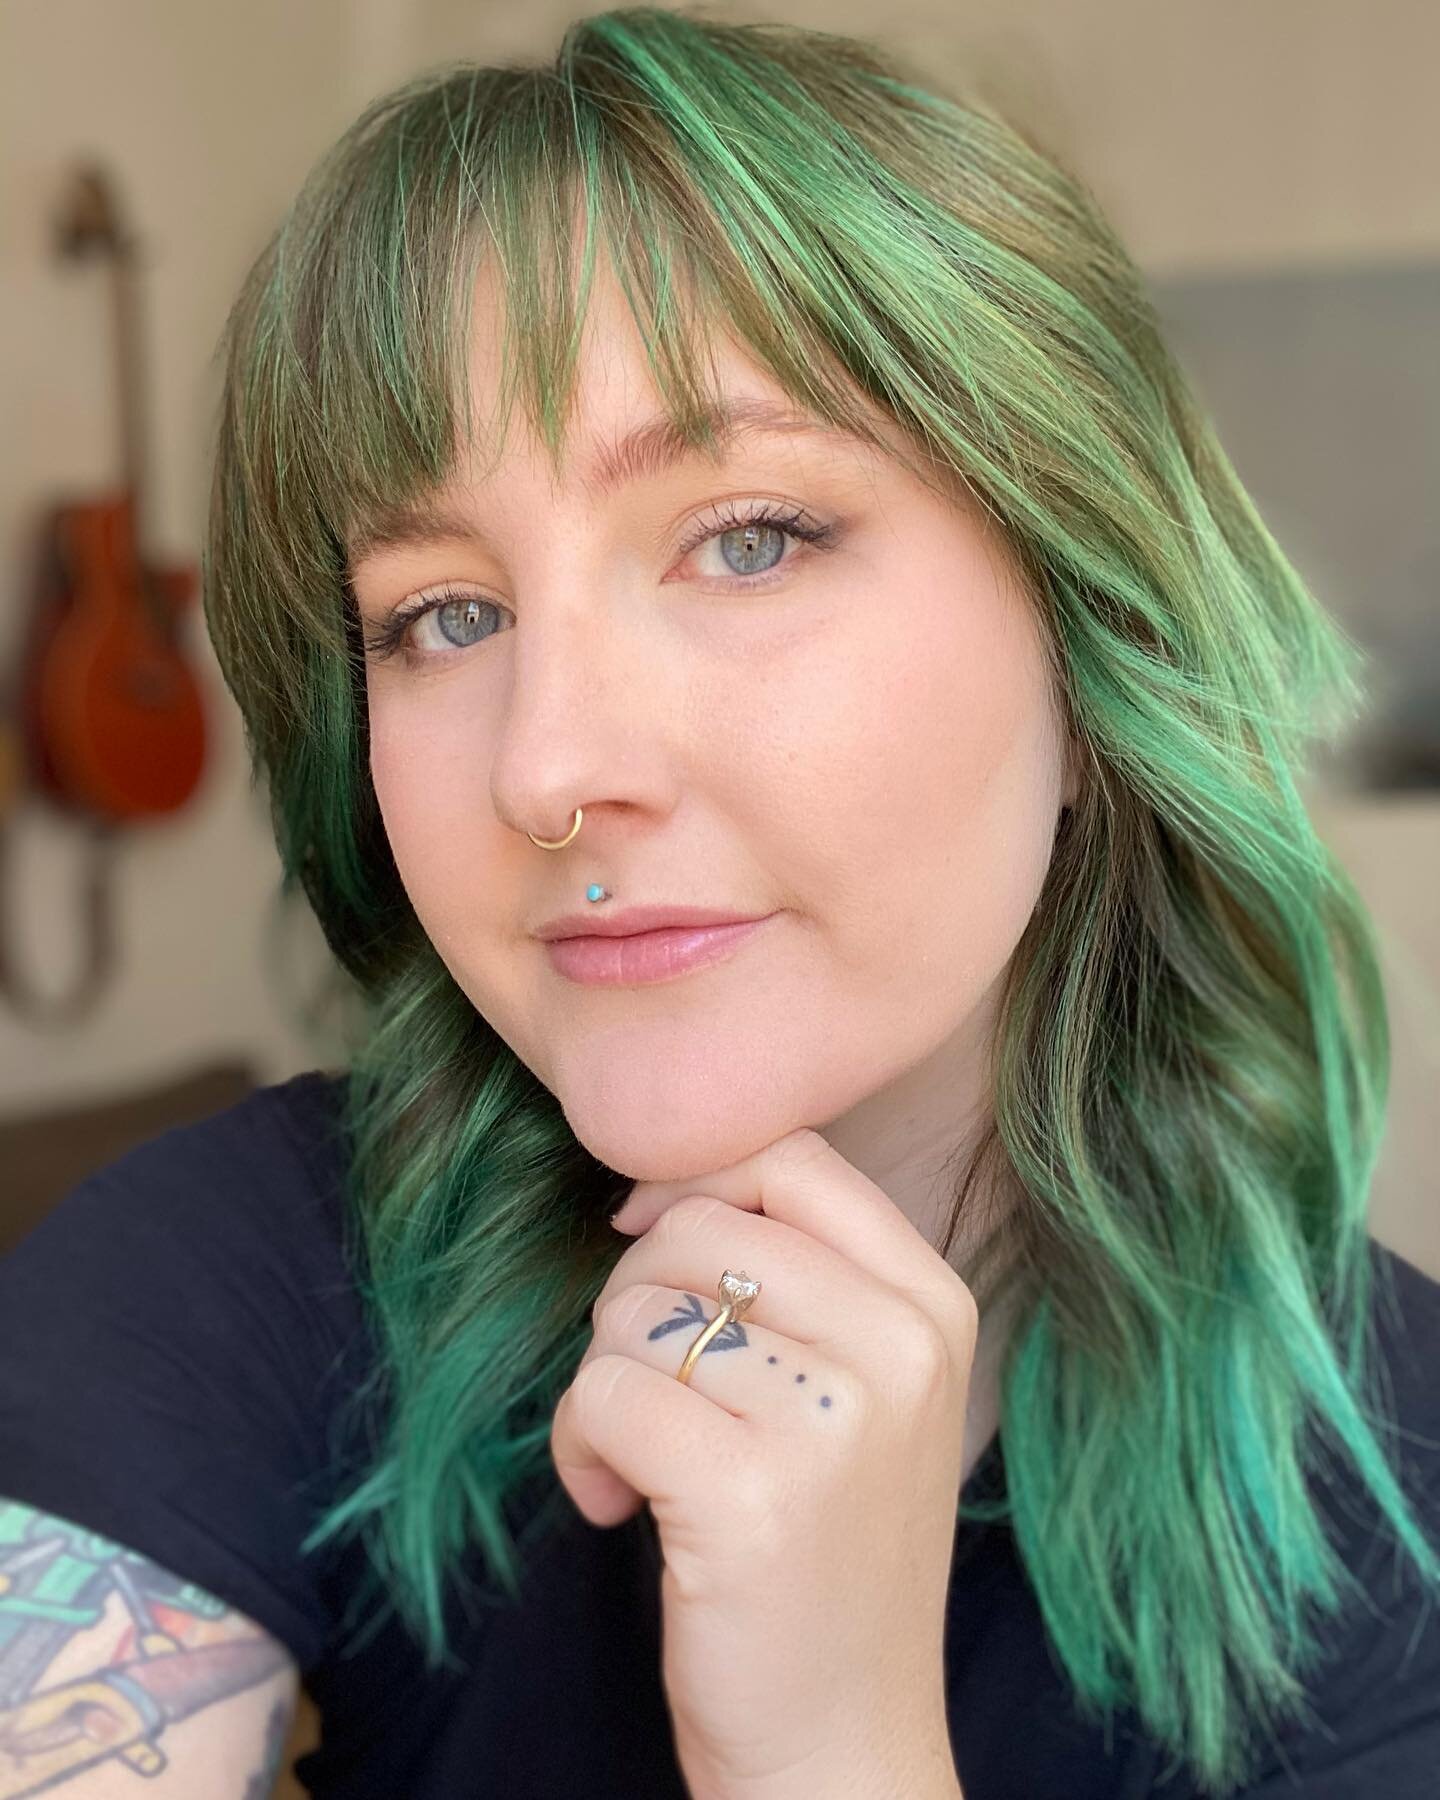 @kendravicken making emerald green and a fresh shaggy cut look boss af. 
Love it when y&rsquo;all take my portfolio photos for me 😍🙏

#donziebeldenhair @bauhaussalonslc #slchairstylist #slcbalayage #slcbalayagespecialist #slchaircuts